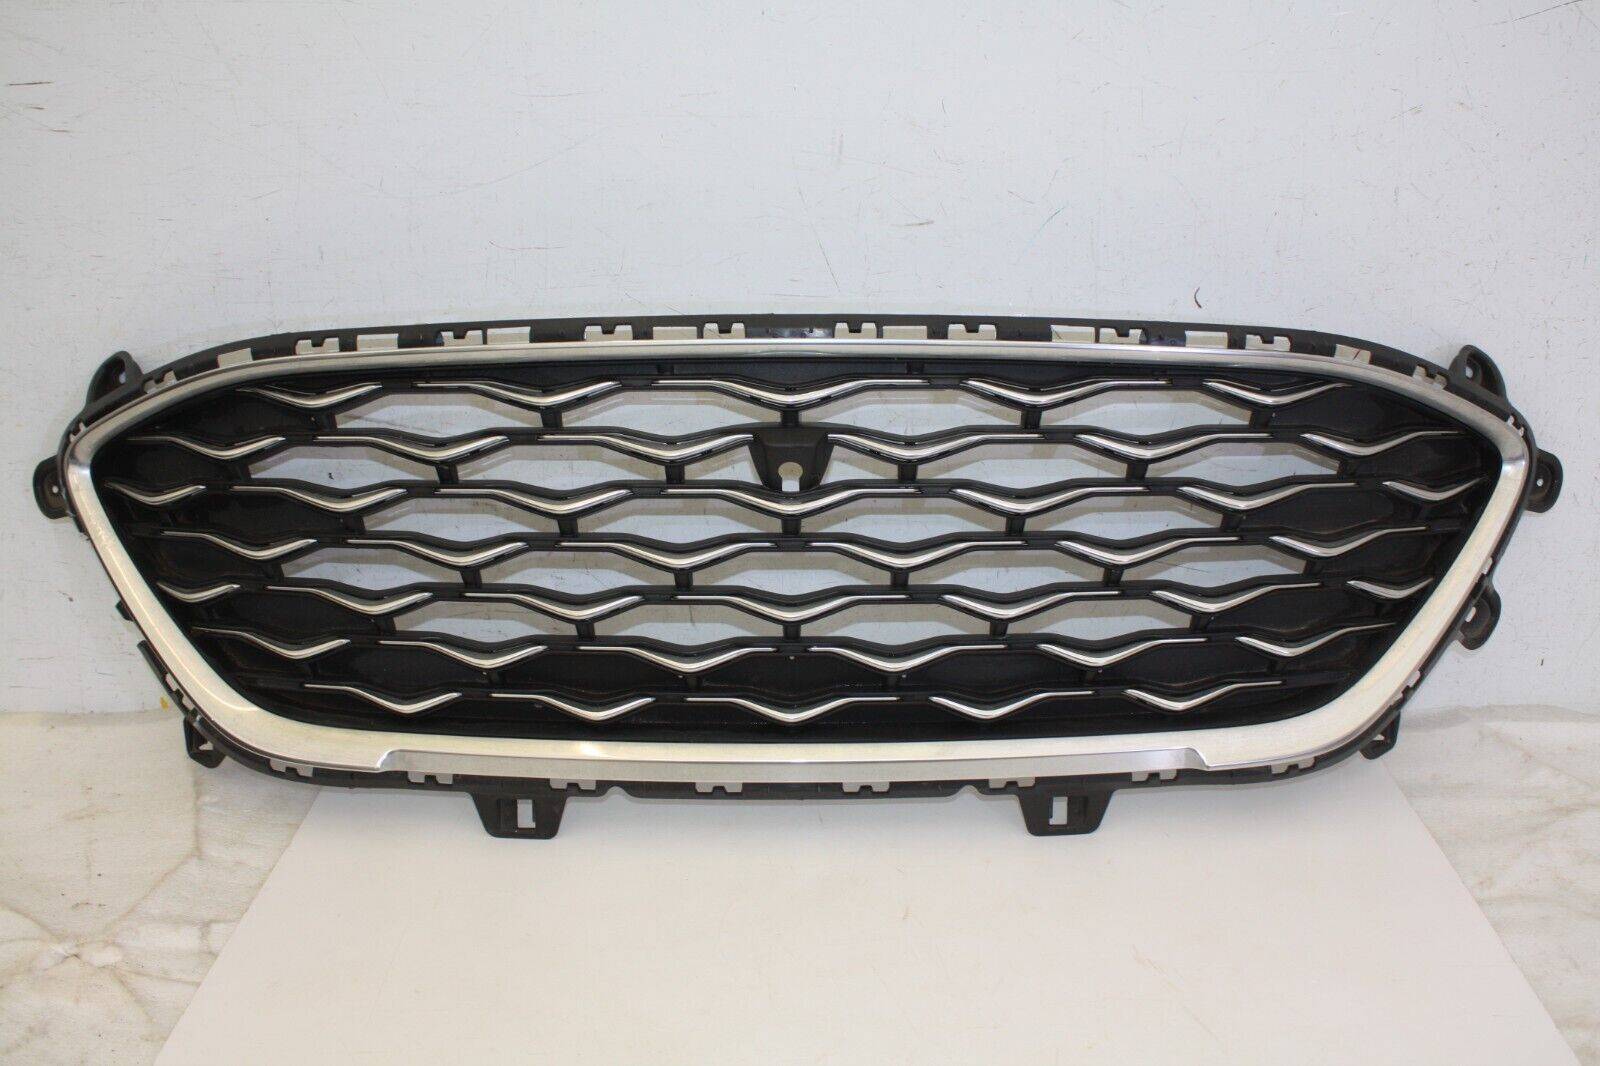 Ford Kuga Front Bumper Grill 2020 ON LV4B 8200 V Genuine SEE PICS 176281041988